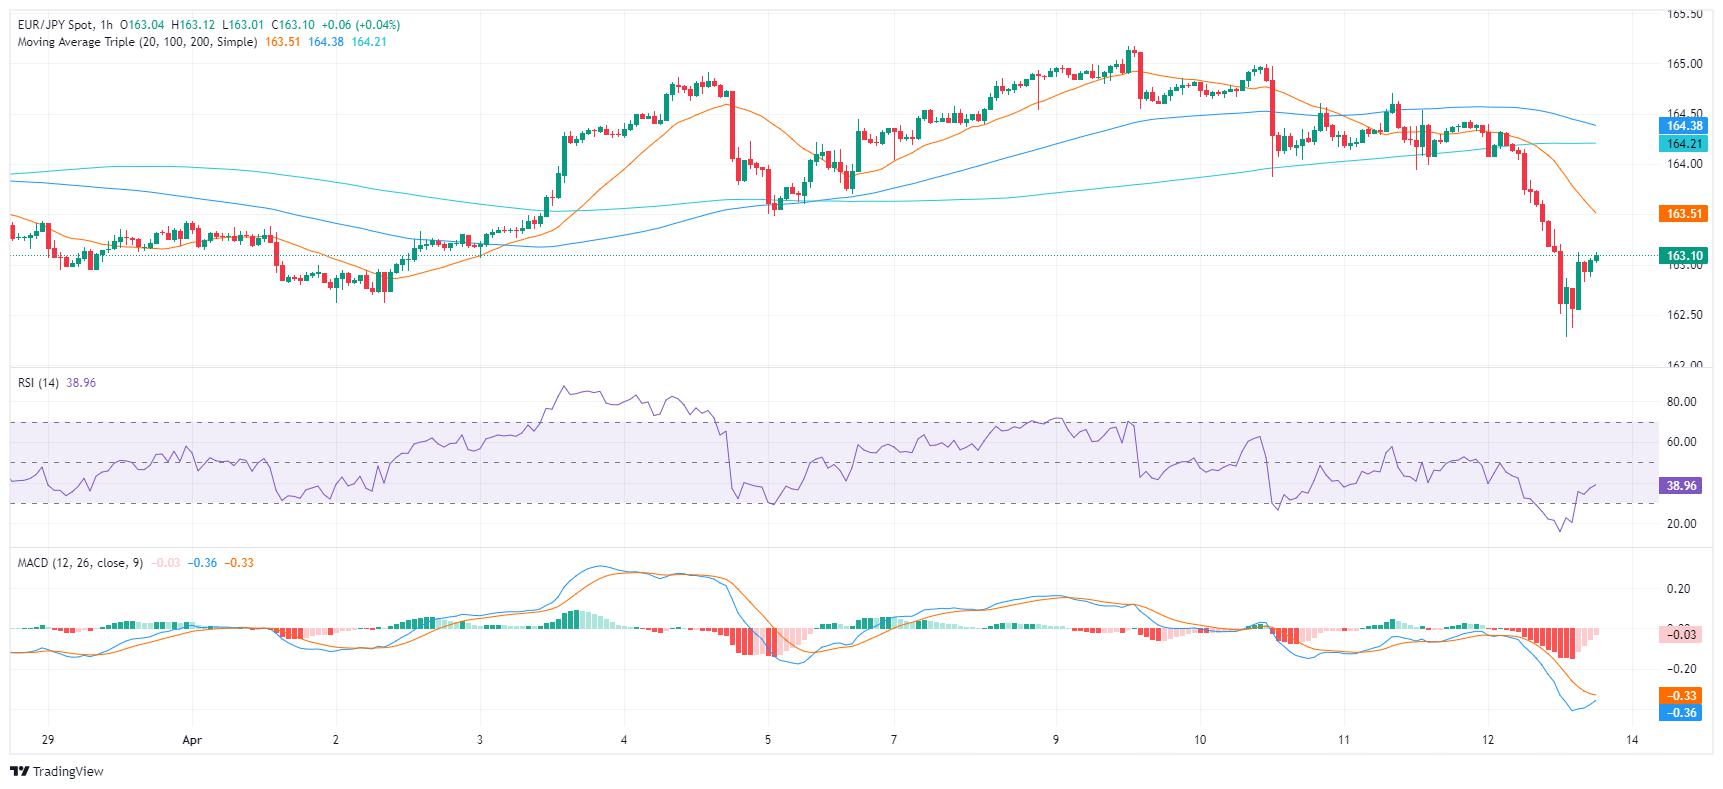 EUR/JPY Price Analysis: Bearish sentiment gains sway, 20-day SMA lost